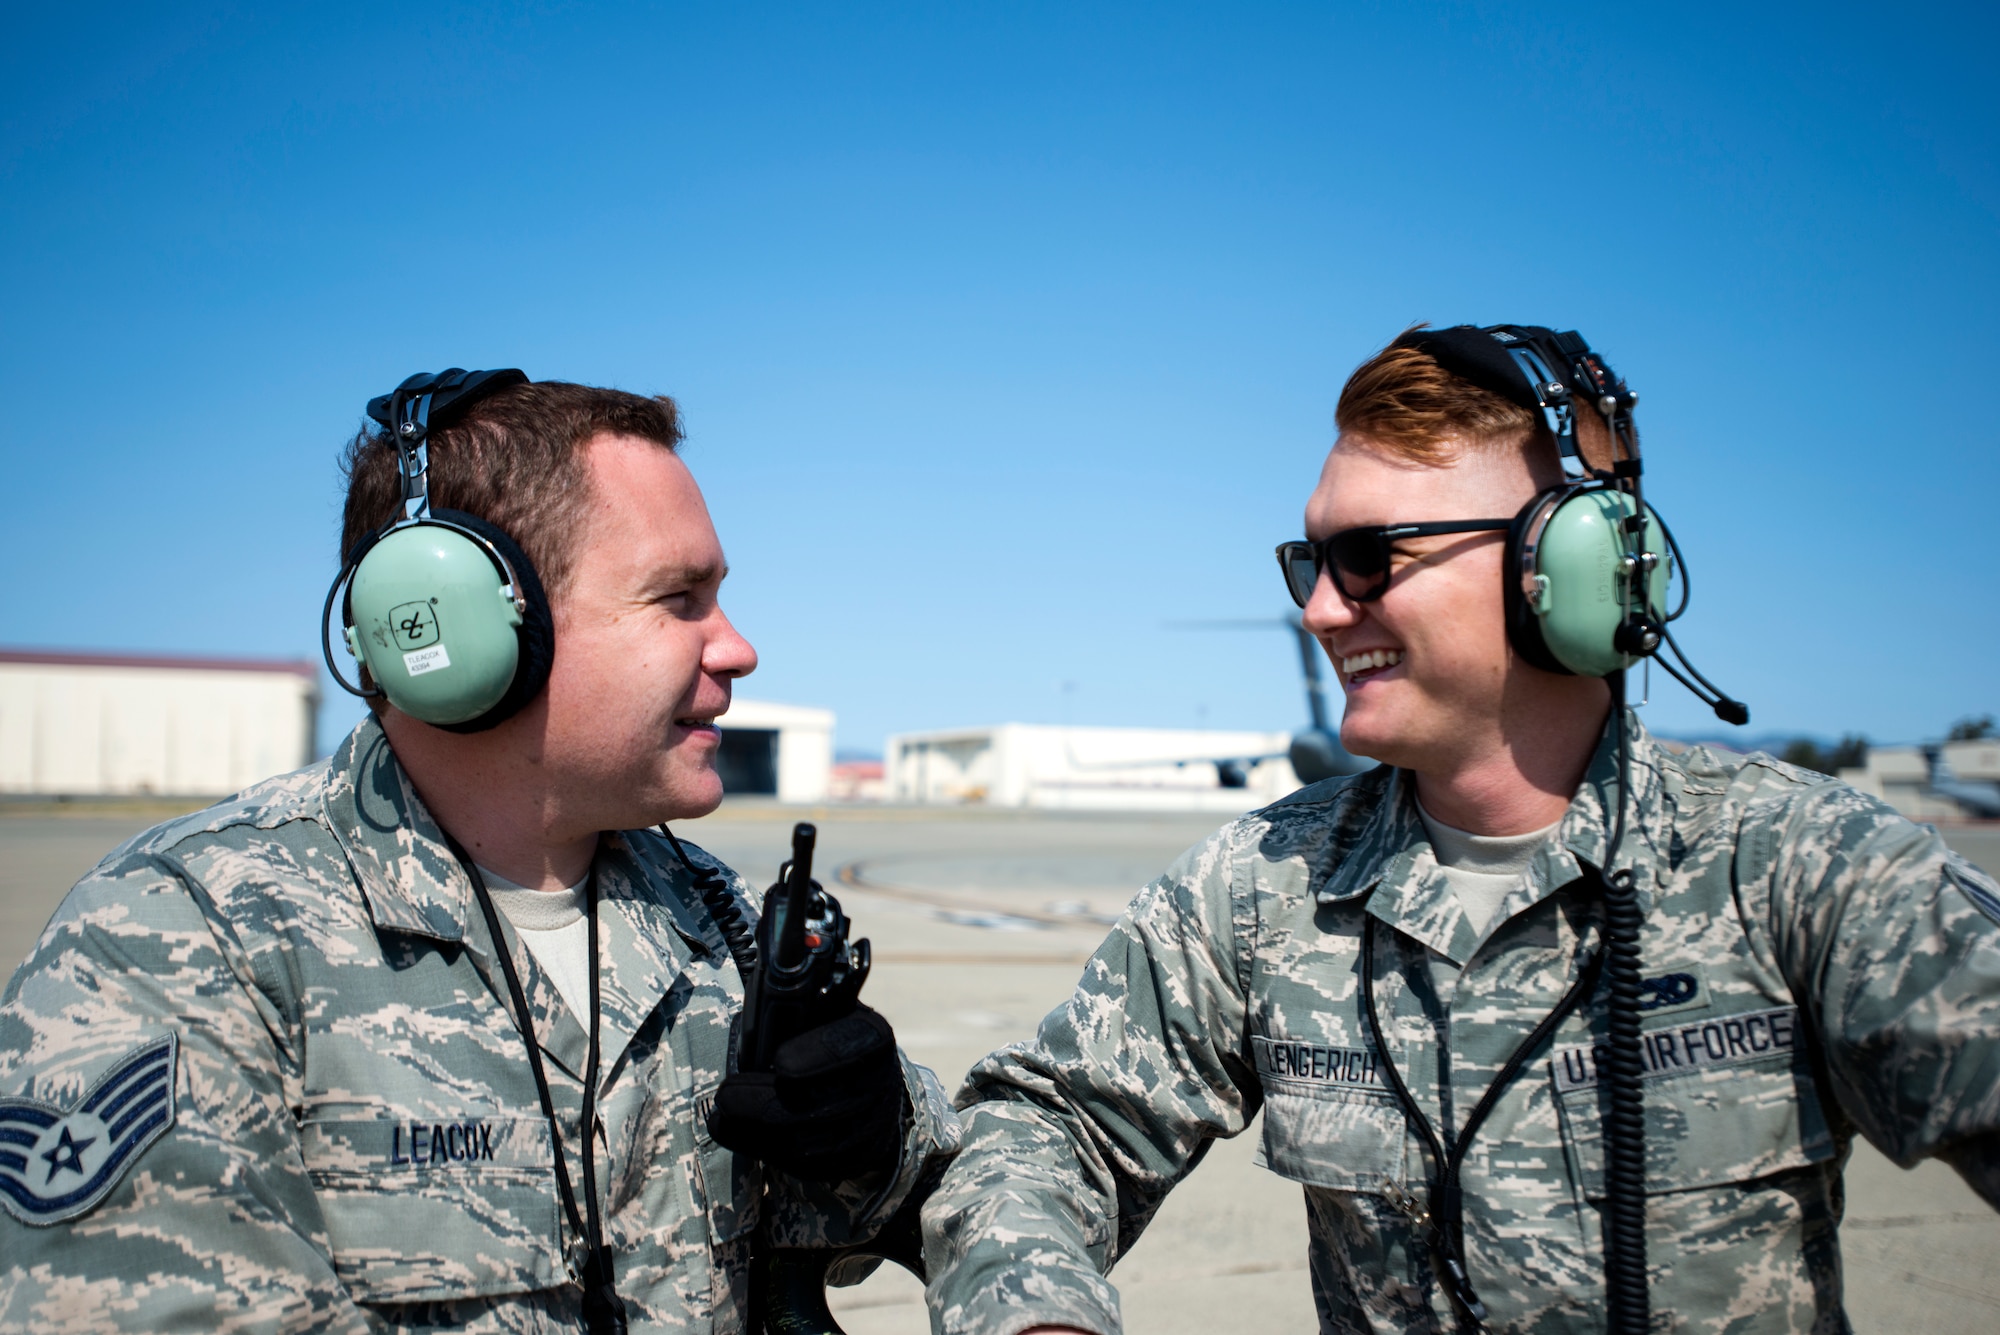 Staff Sgt. Taylor Leacox and Senior Airman Daniel Lengerich, 349th Aircraft Maintenance Squadron crew chiefs, discuss next steps to take before a C-5M Super Galaxy can launch on Aug. 11, 2018, at Travis Air Force Base, Calif. The 349th and 60th AMXS work together to launch aircraft in a seemless active duty and Air Force Reserve integration.